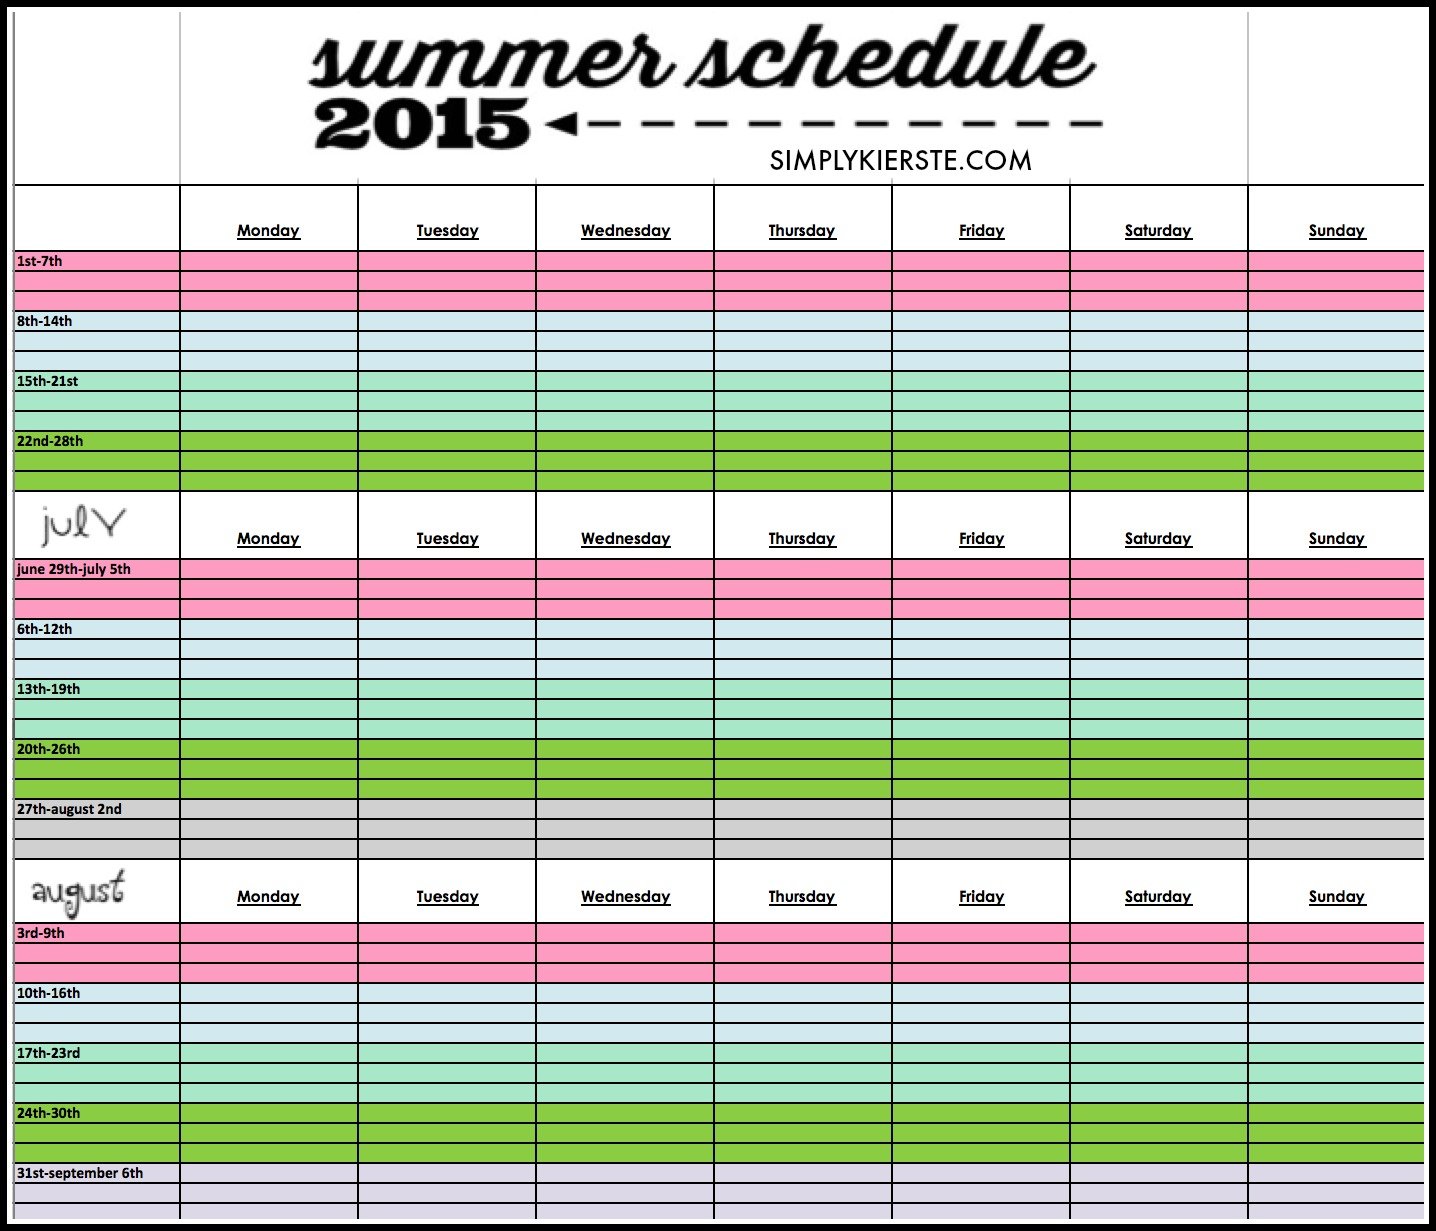 Make your summer easier with a printable summer schedule & calendar 2015